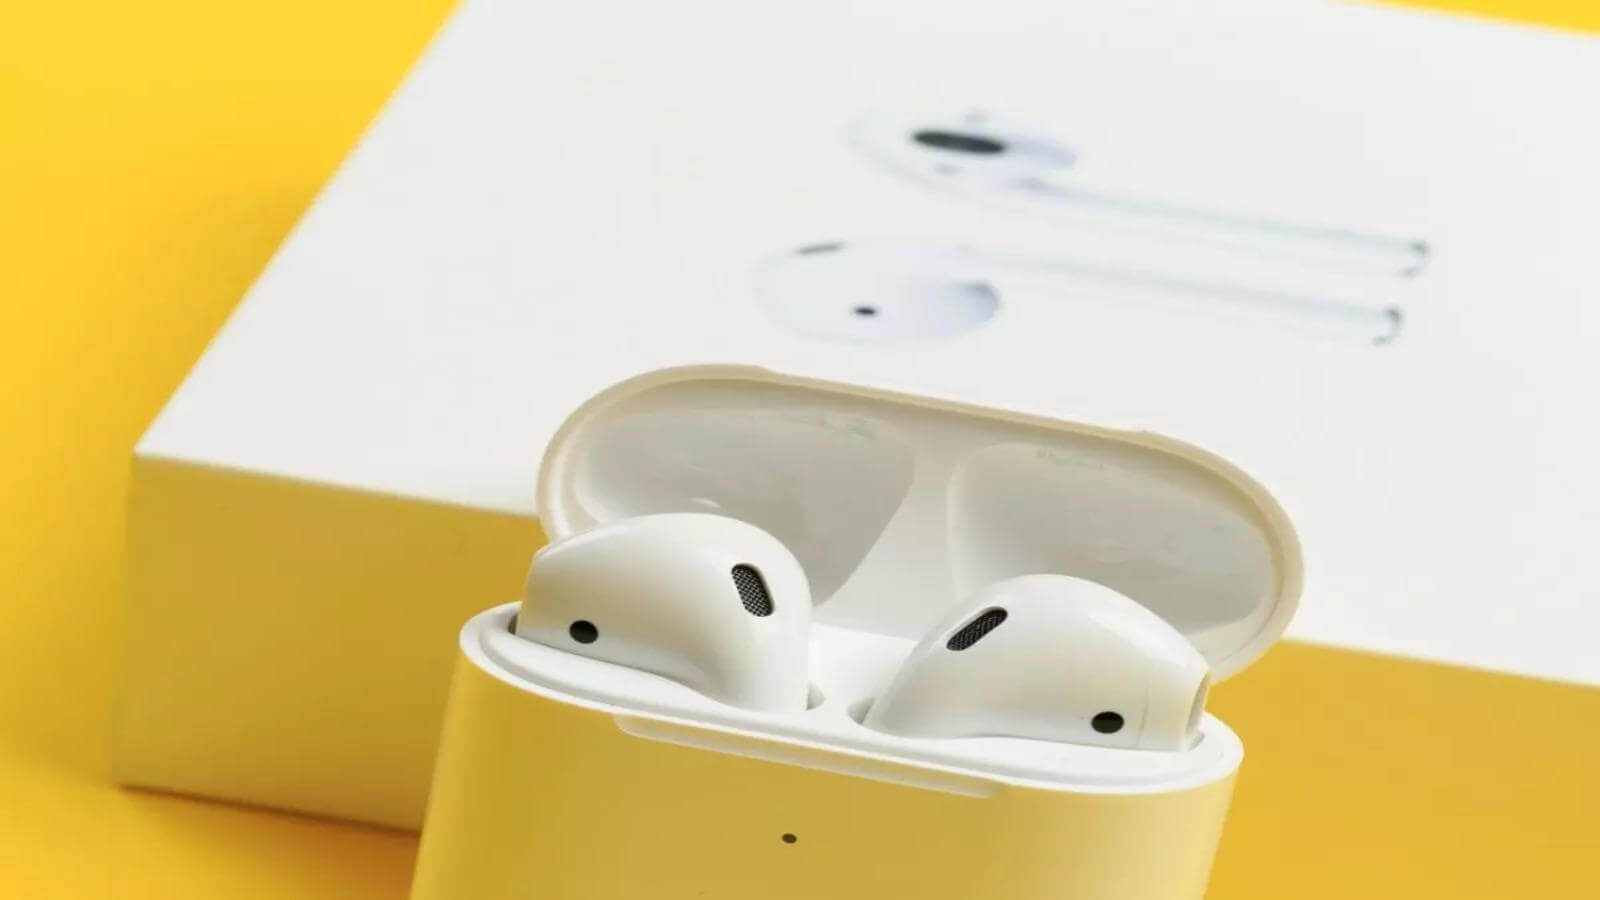 Apple Unveils Standalone USB-C Case for AirPods Pro, Paving the Way for Seamless Upgrades and Ecosystem Transition